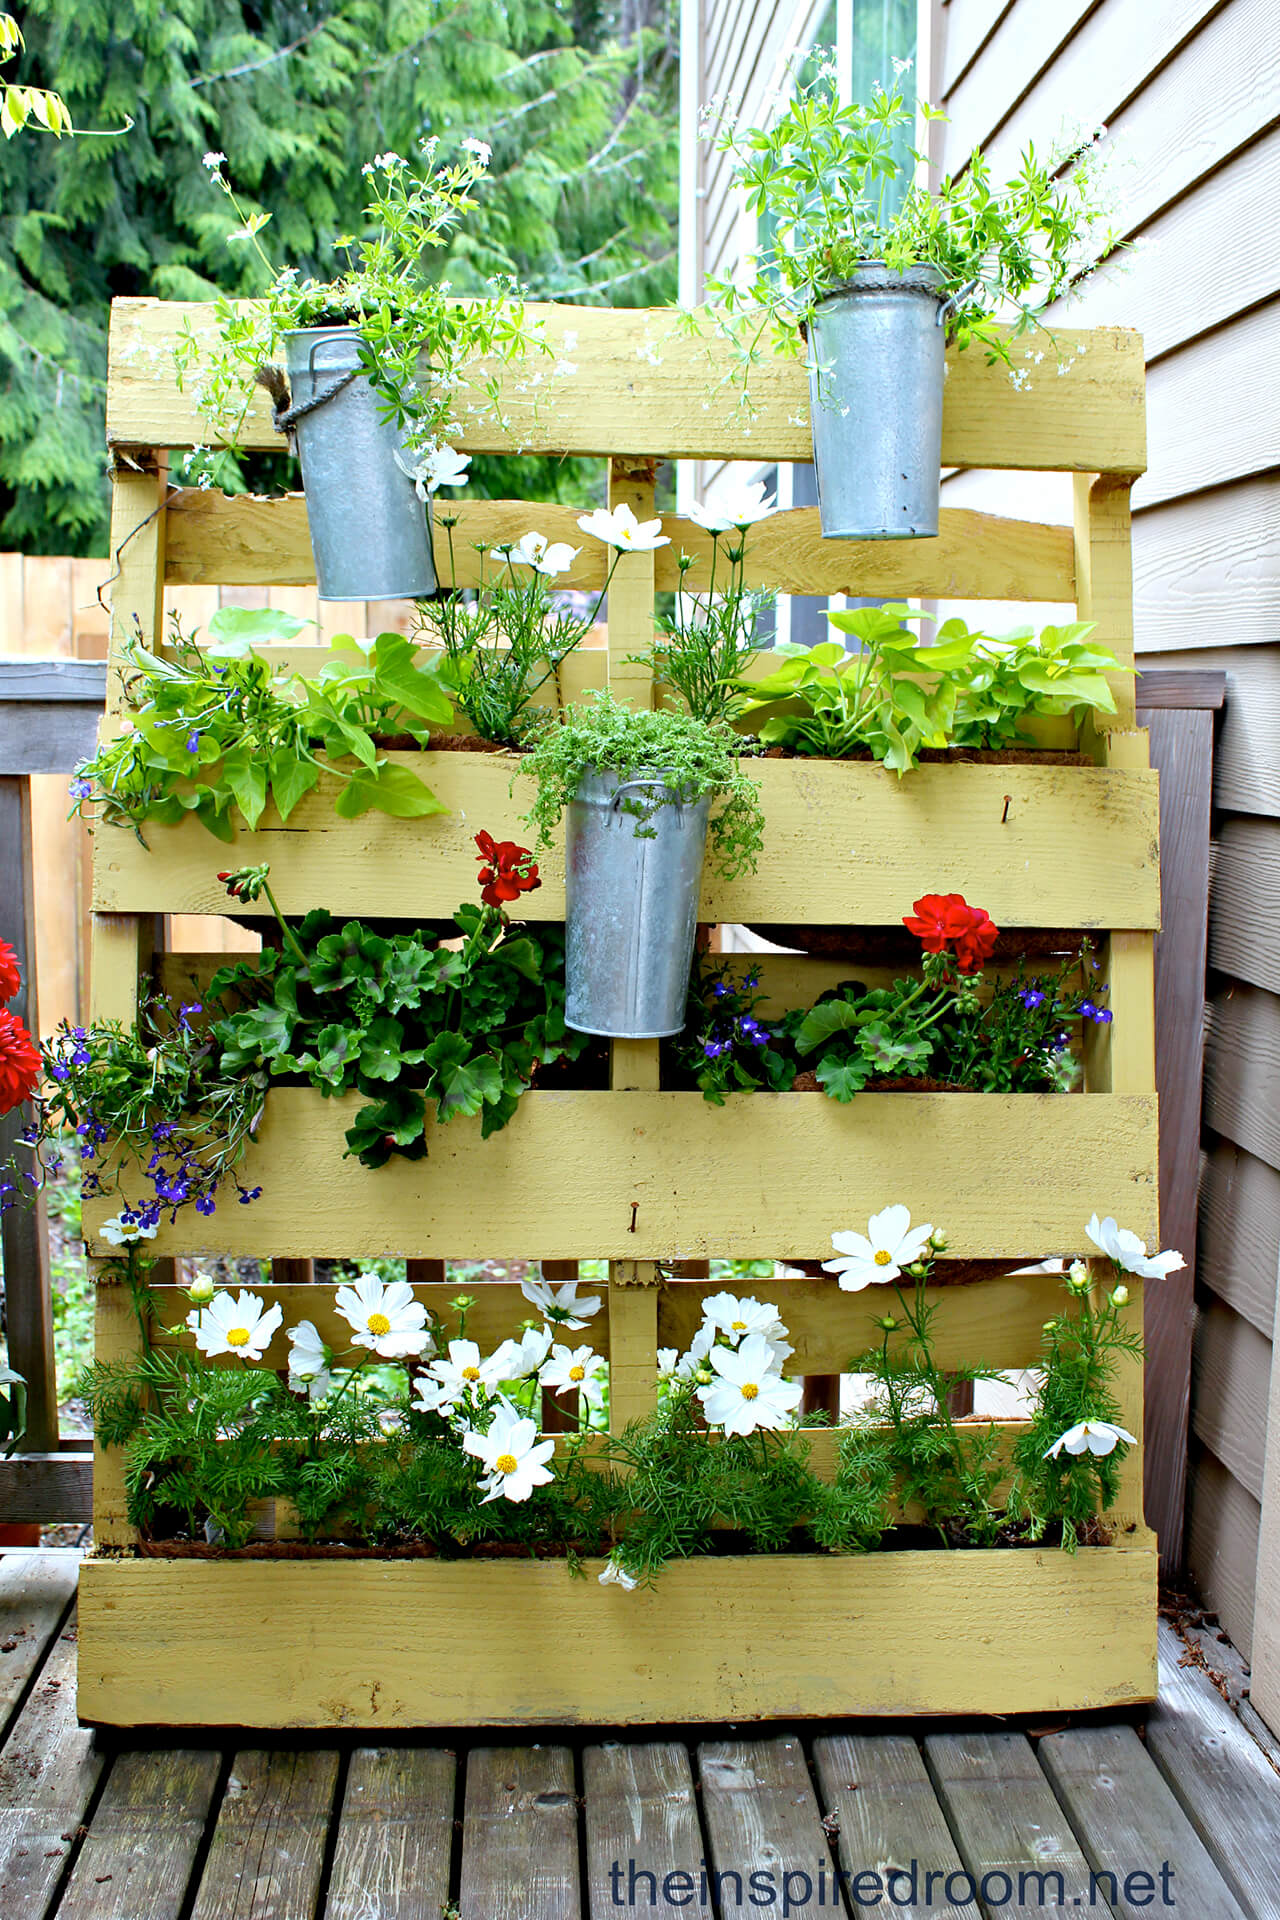 Take Pallet Gardening Vertical With This Simple Design